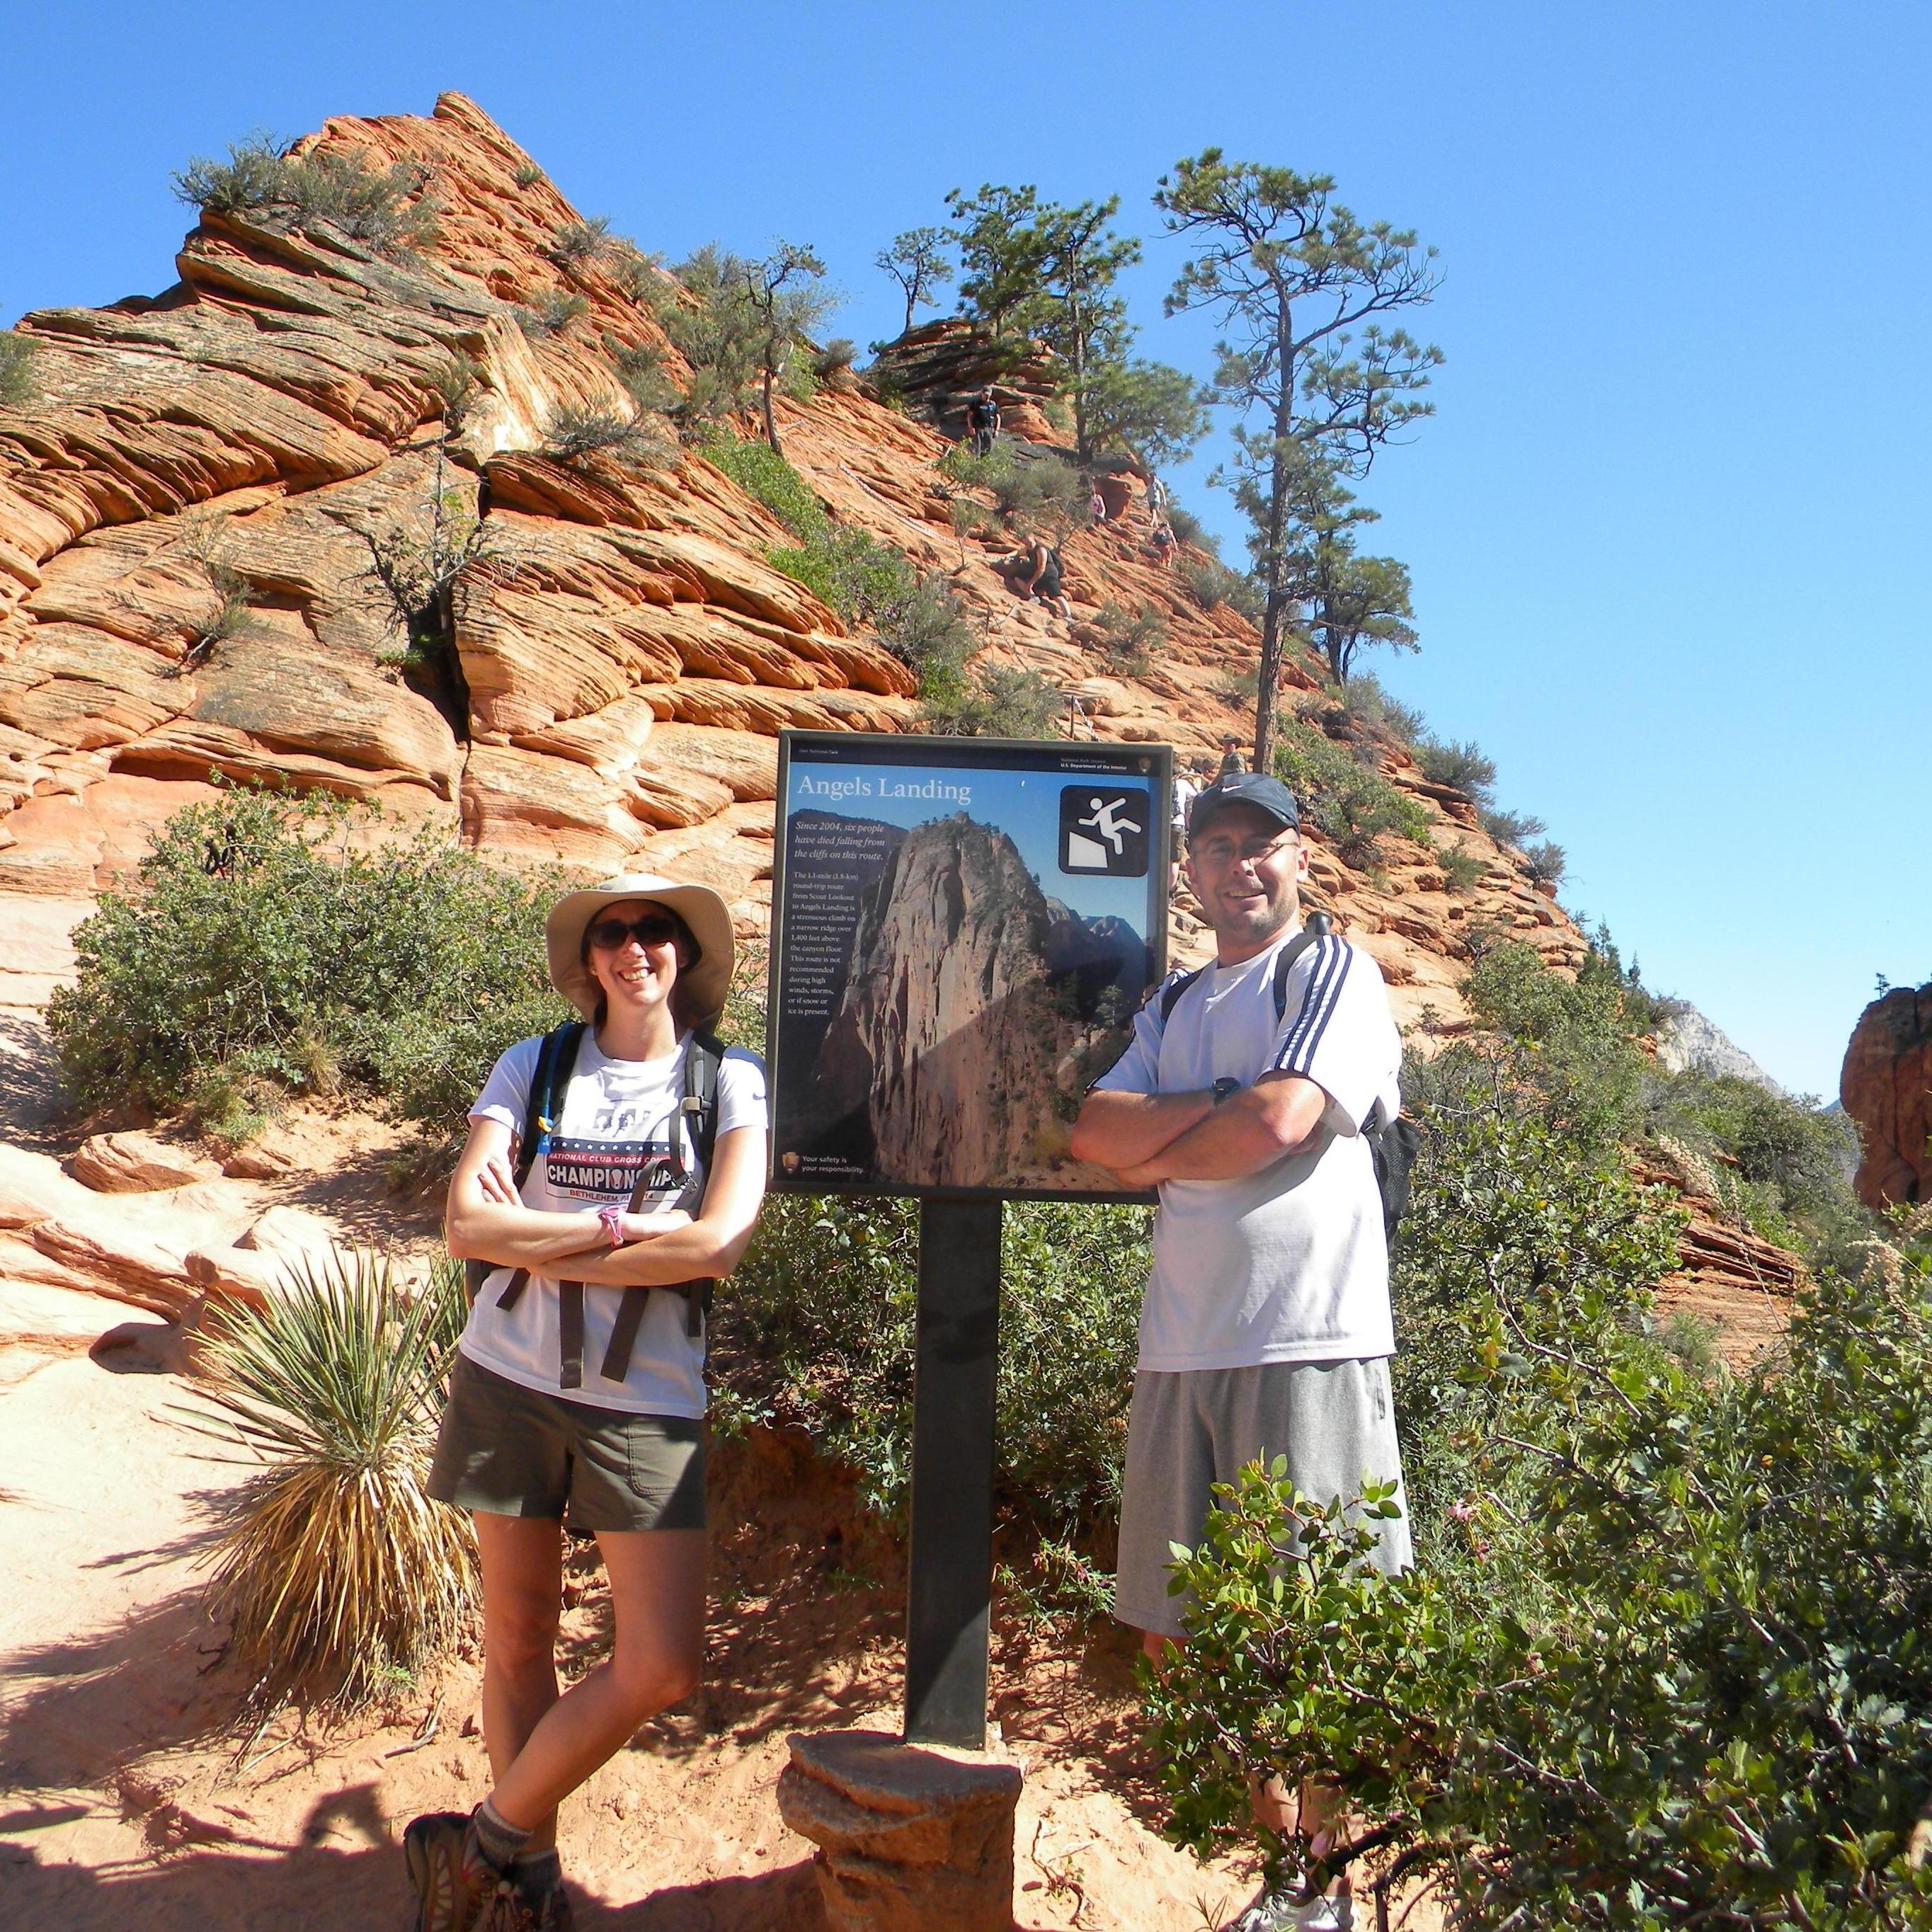 Angel's Landing hike at Zion National Park (June 2015), turns out I should have warned Jason that shoes with good grip were important!